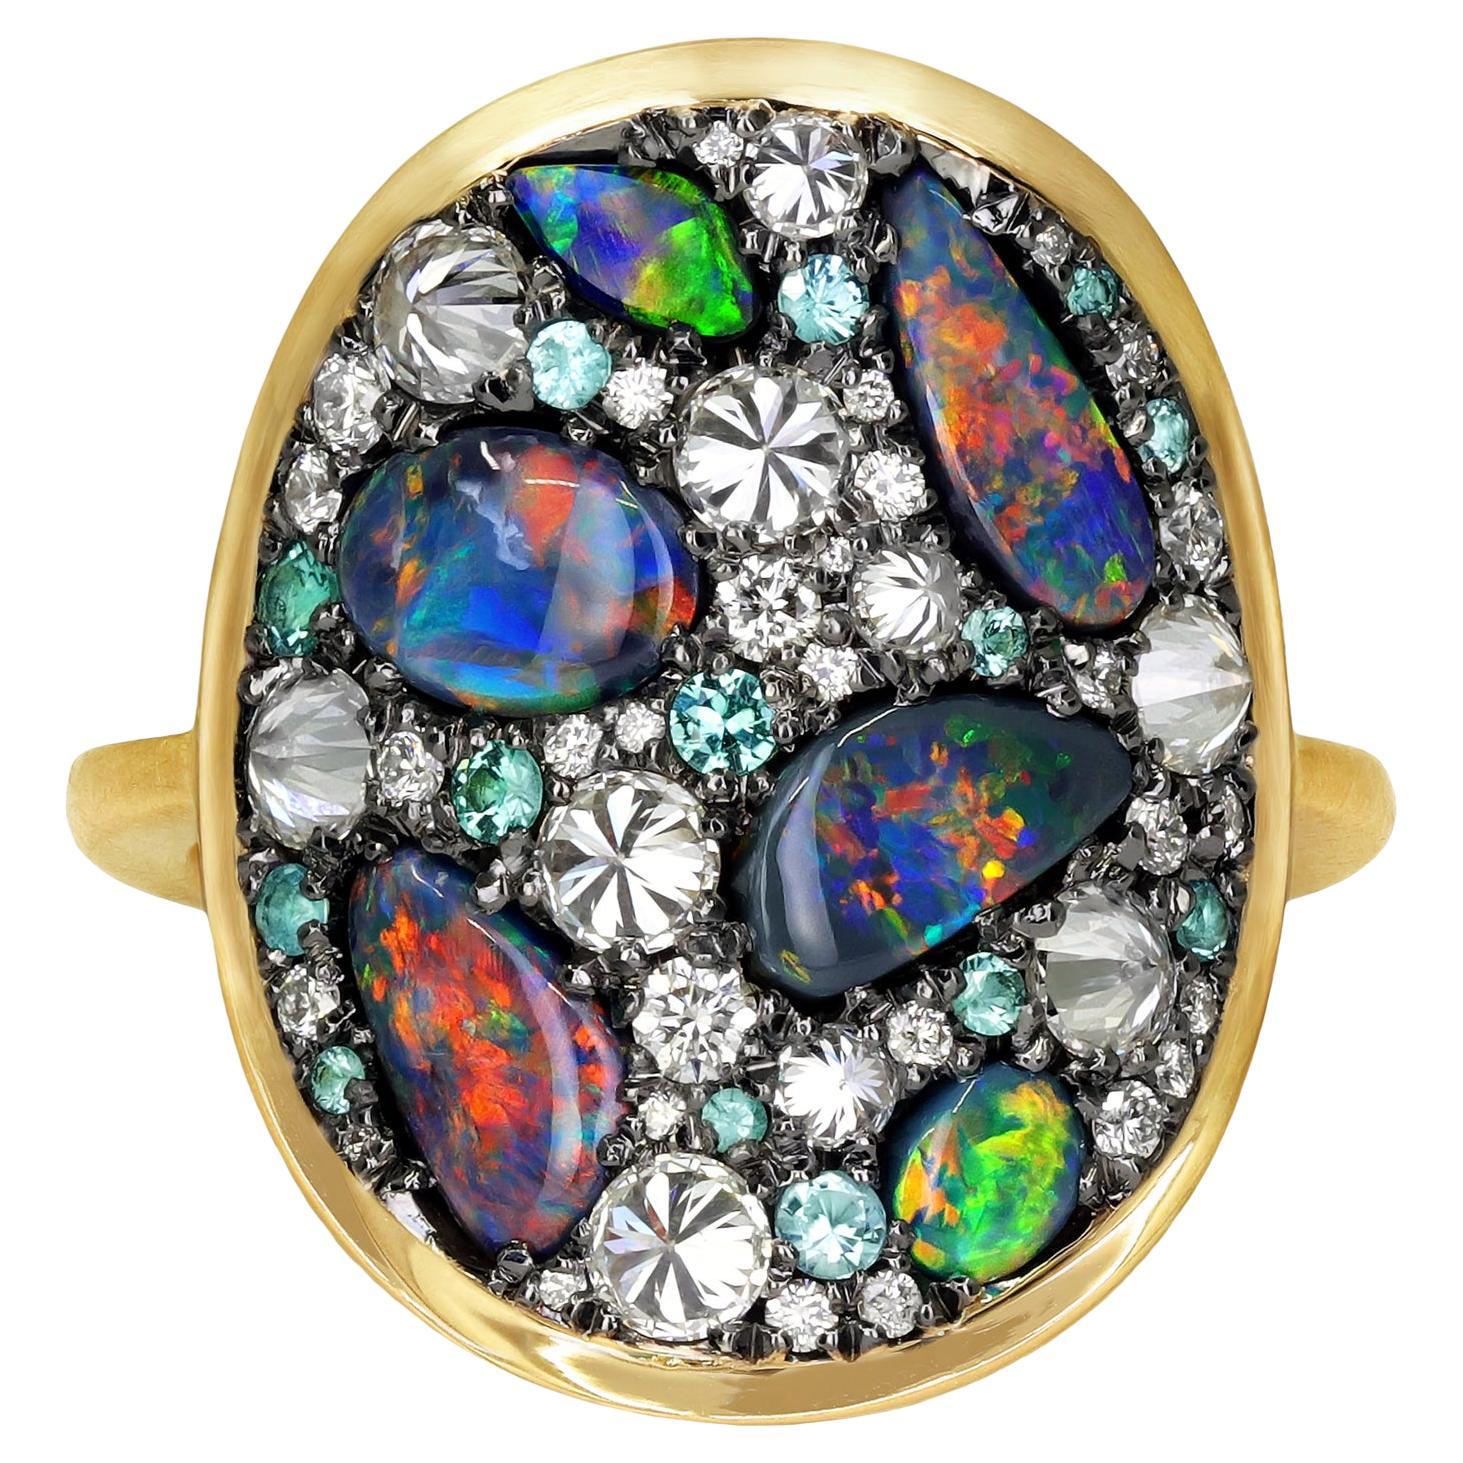 One of a kind Starstruck Ring handmade in Belgium by jewelry artist Joke Quick in matte-finished 18k yellow gold and blackened sterling silver featuring six exceptionally-fine quality Australian lightning ridge black opal cabochons totaling 2.01